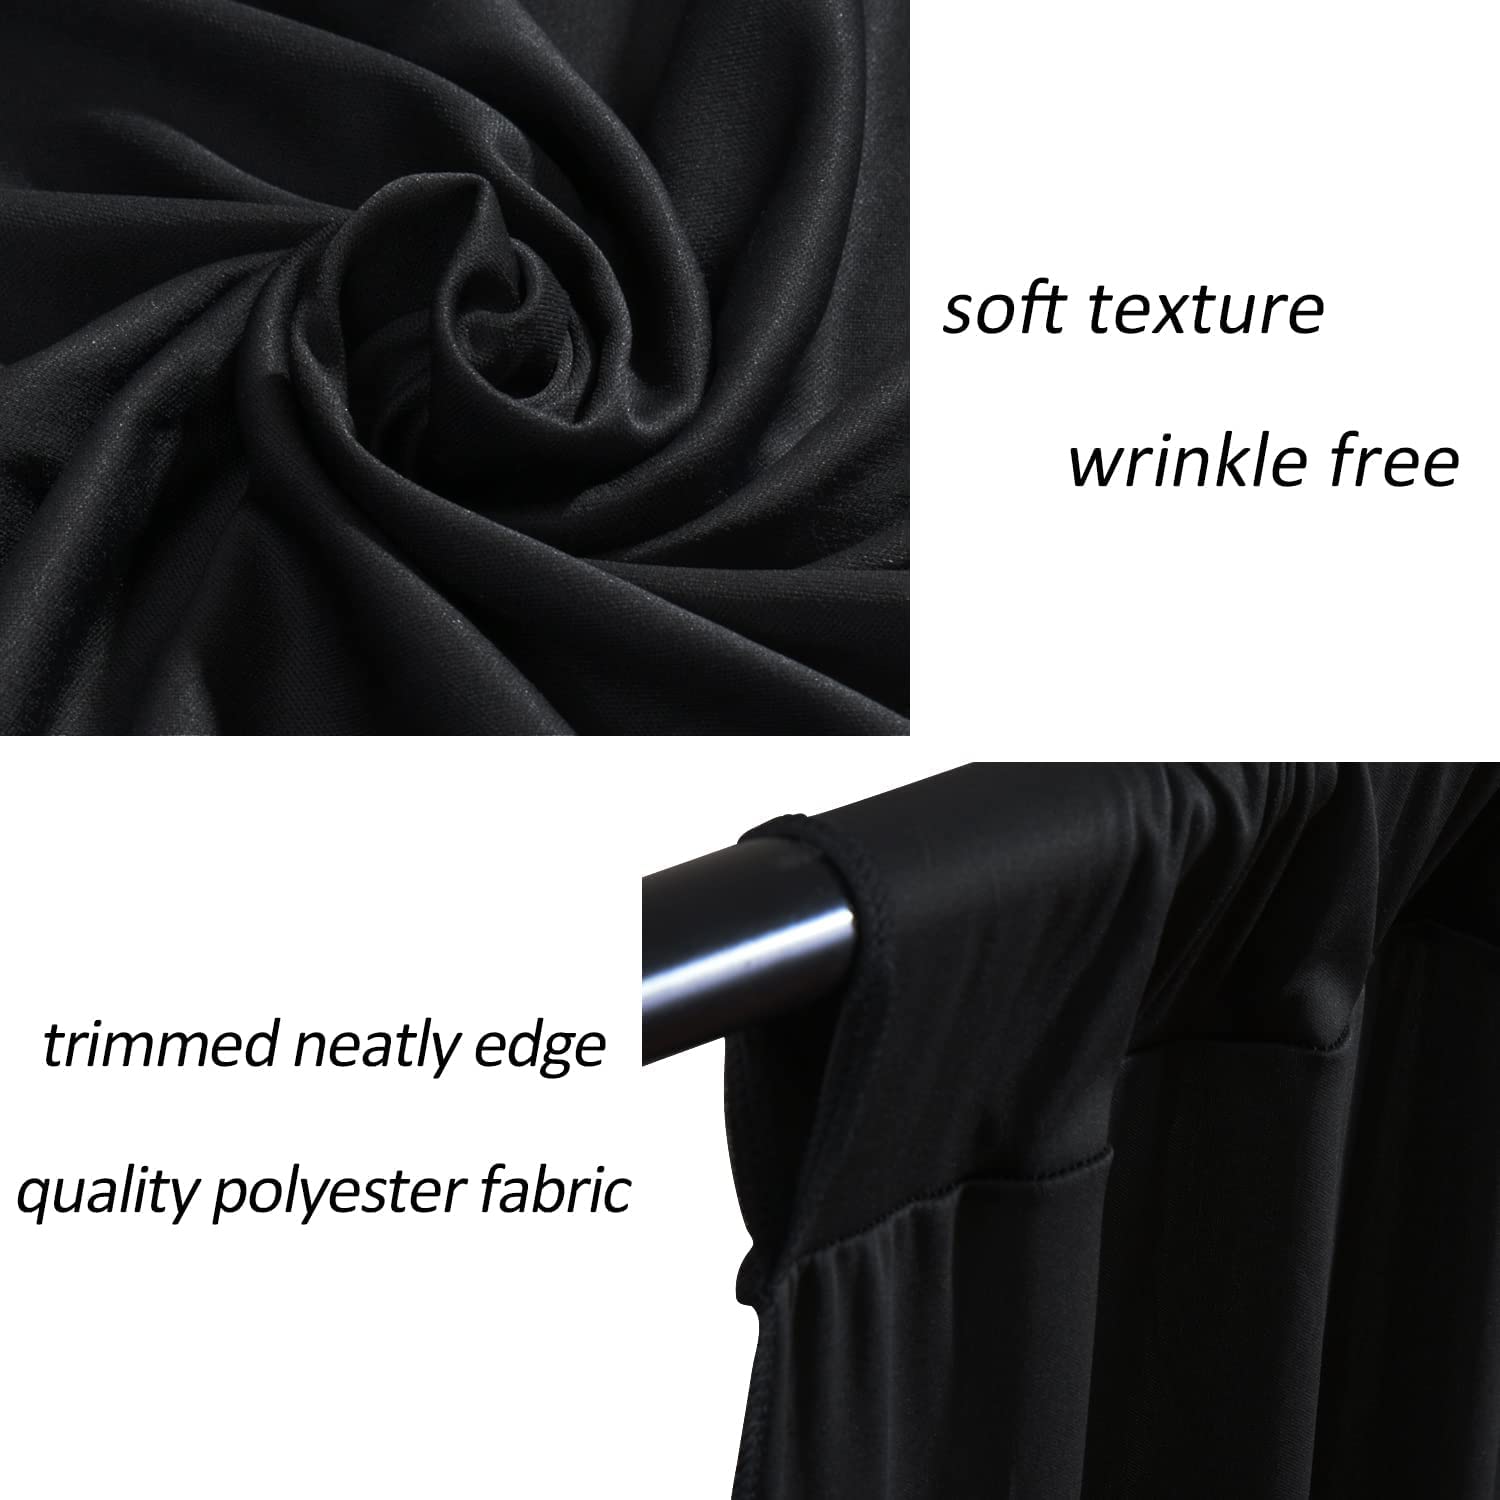 AK TRADING CO. 10 feet x 10 feet Polyester Backdrop Drapes Curtains Panels with Rod Pockets - Wedding Ceremony Party Home Window Decorations - Black